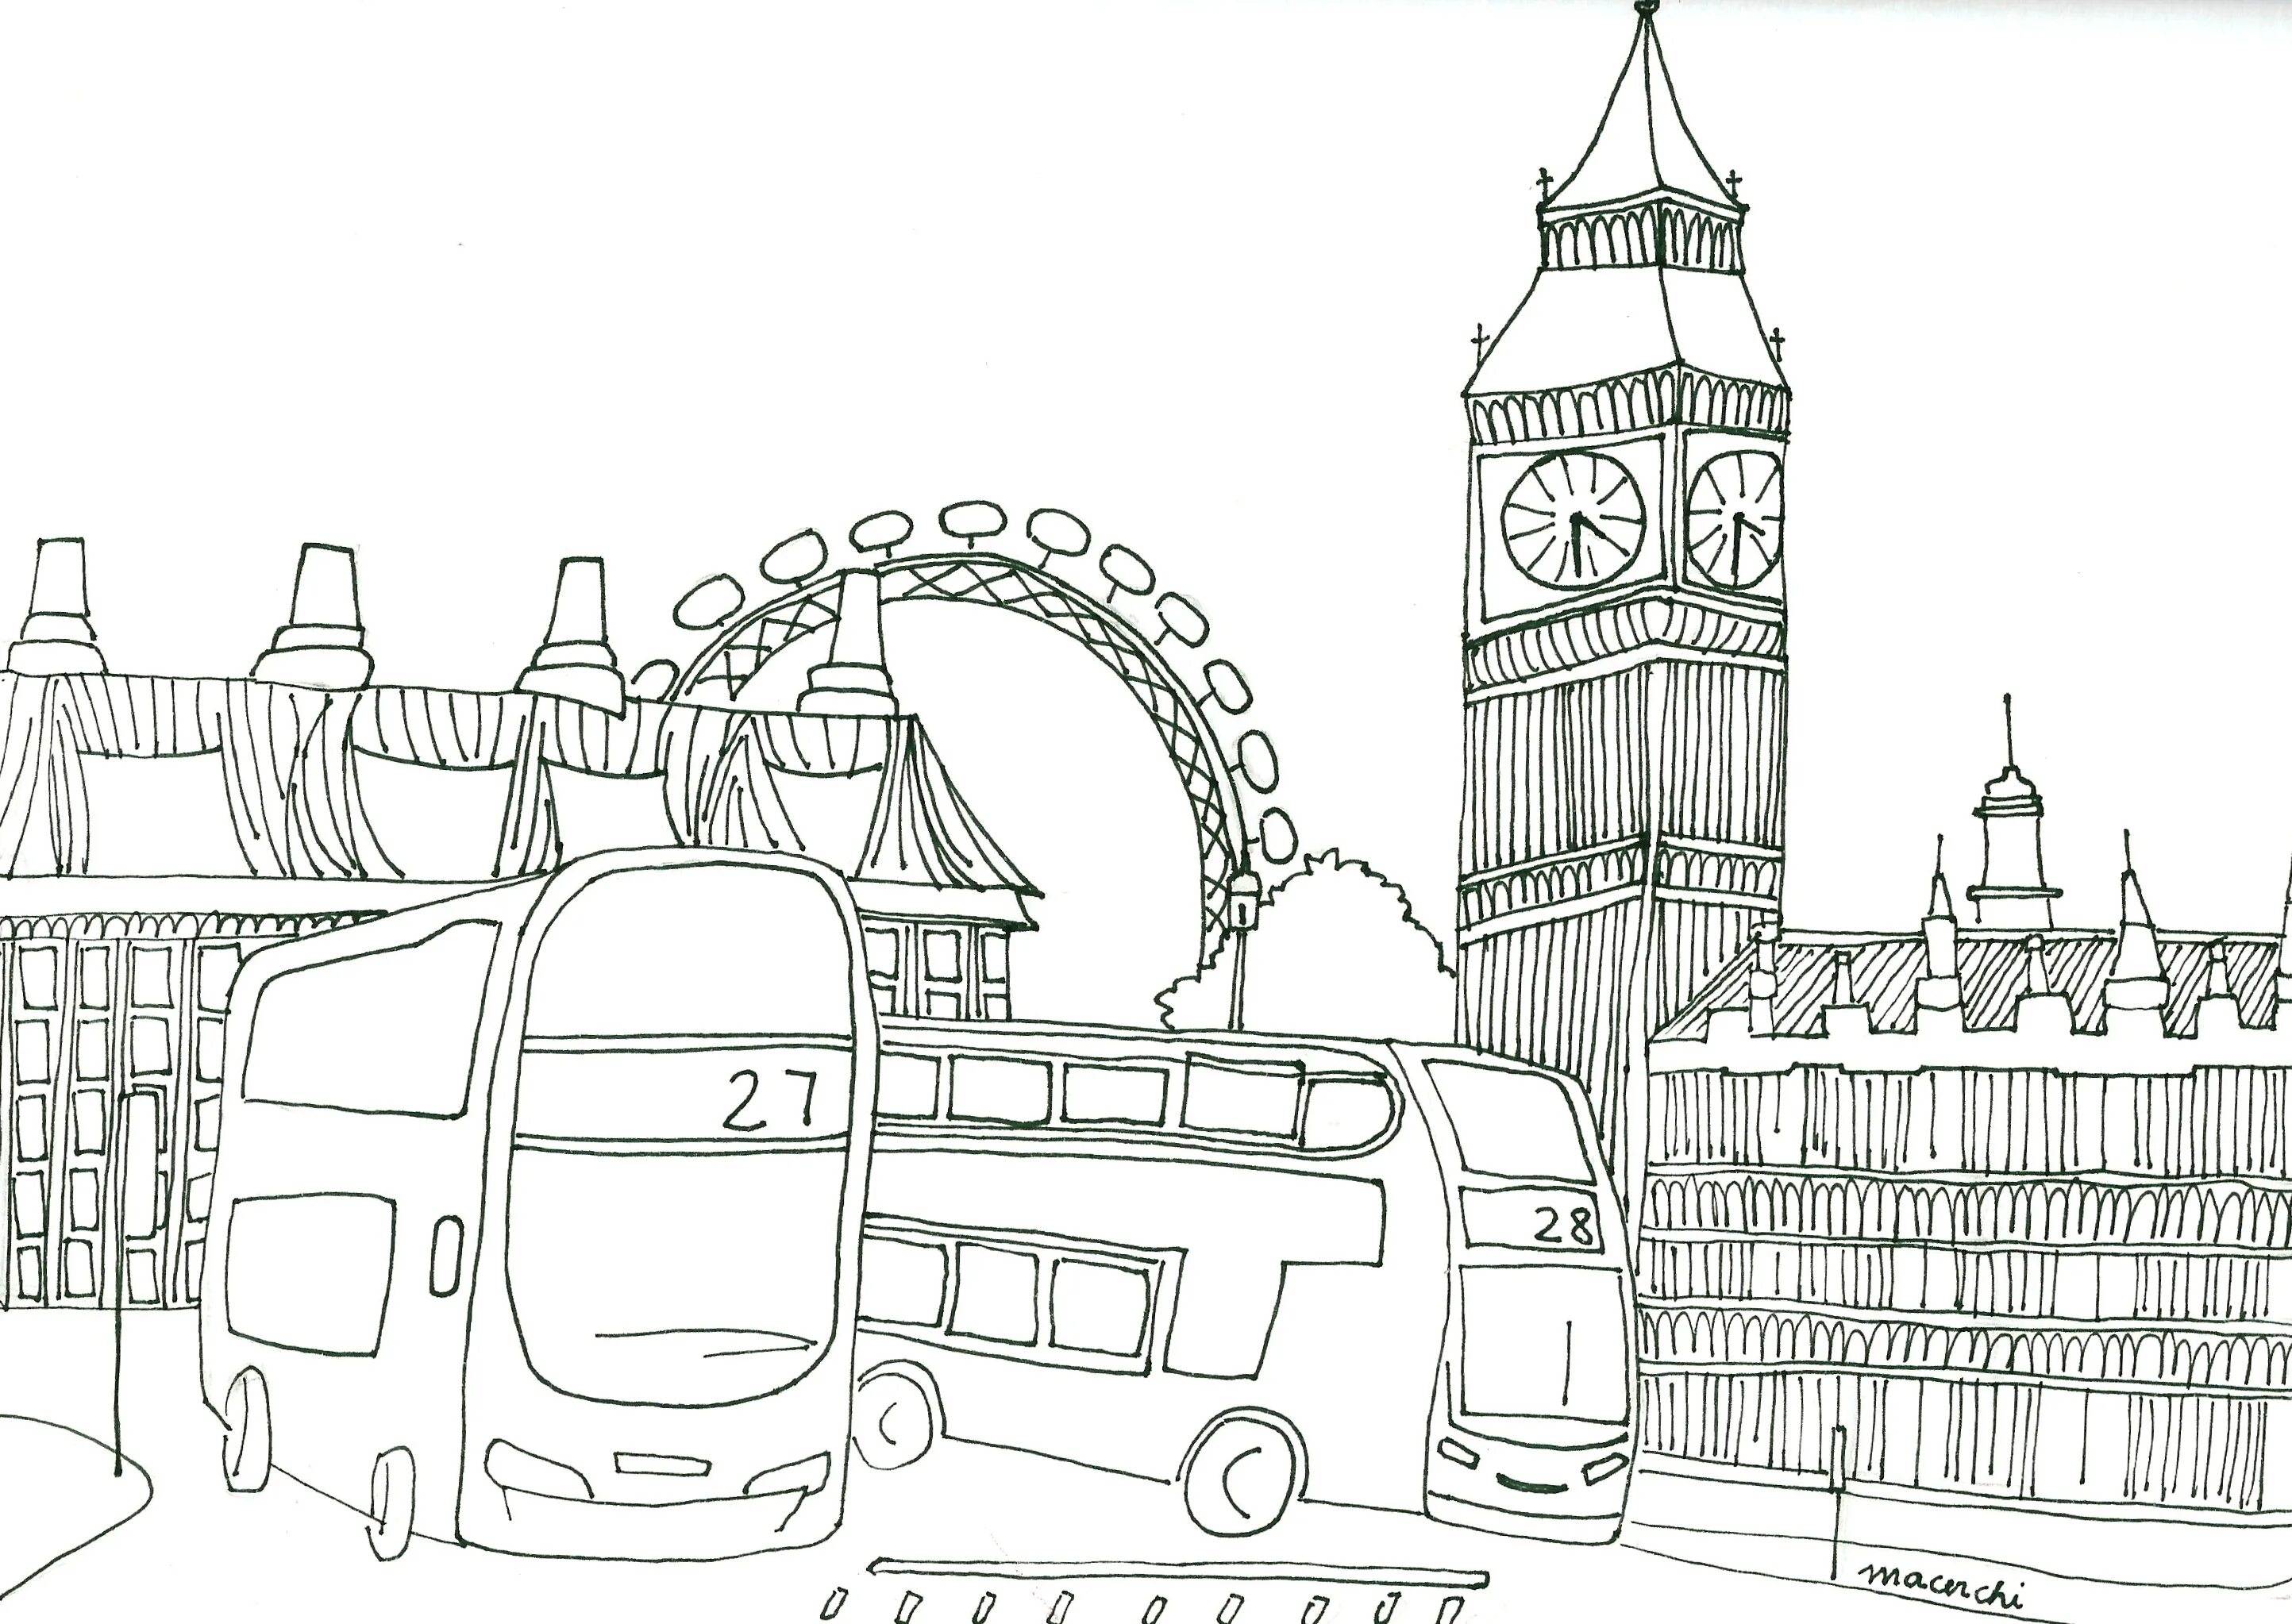 Coloring book glamorous london for kids